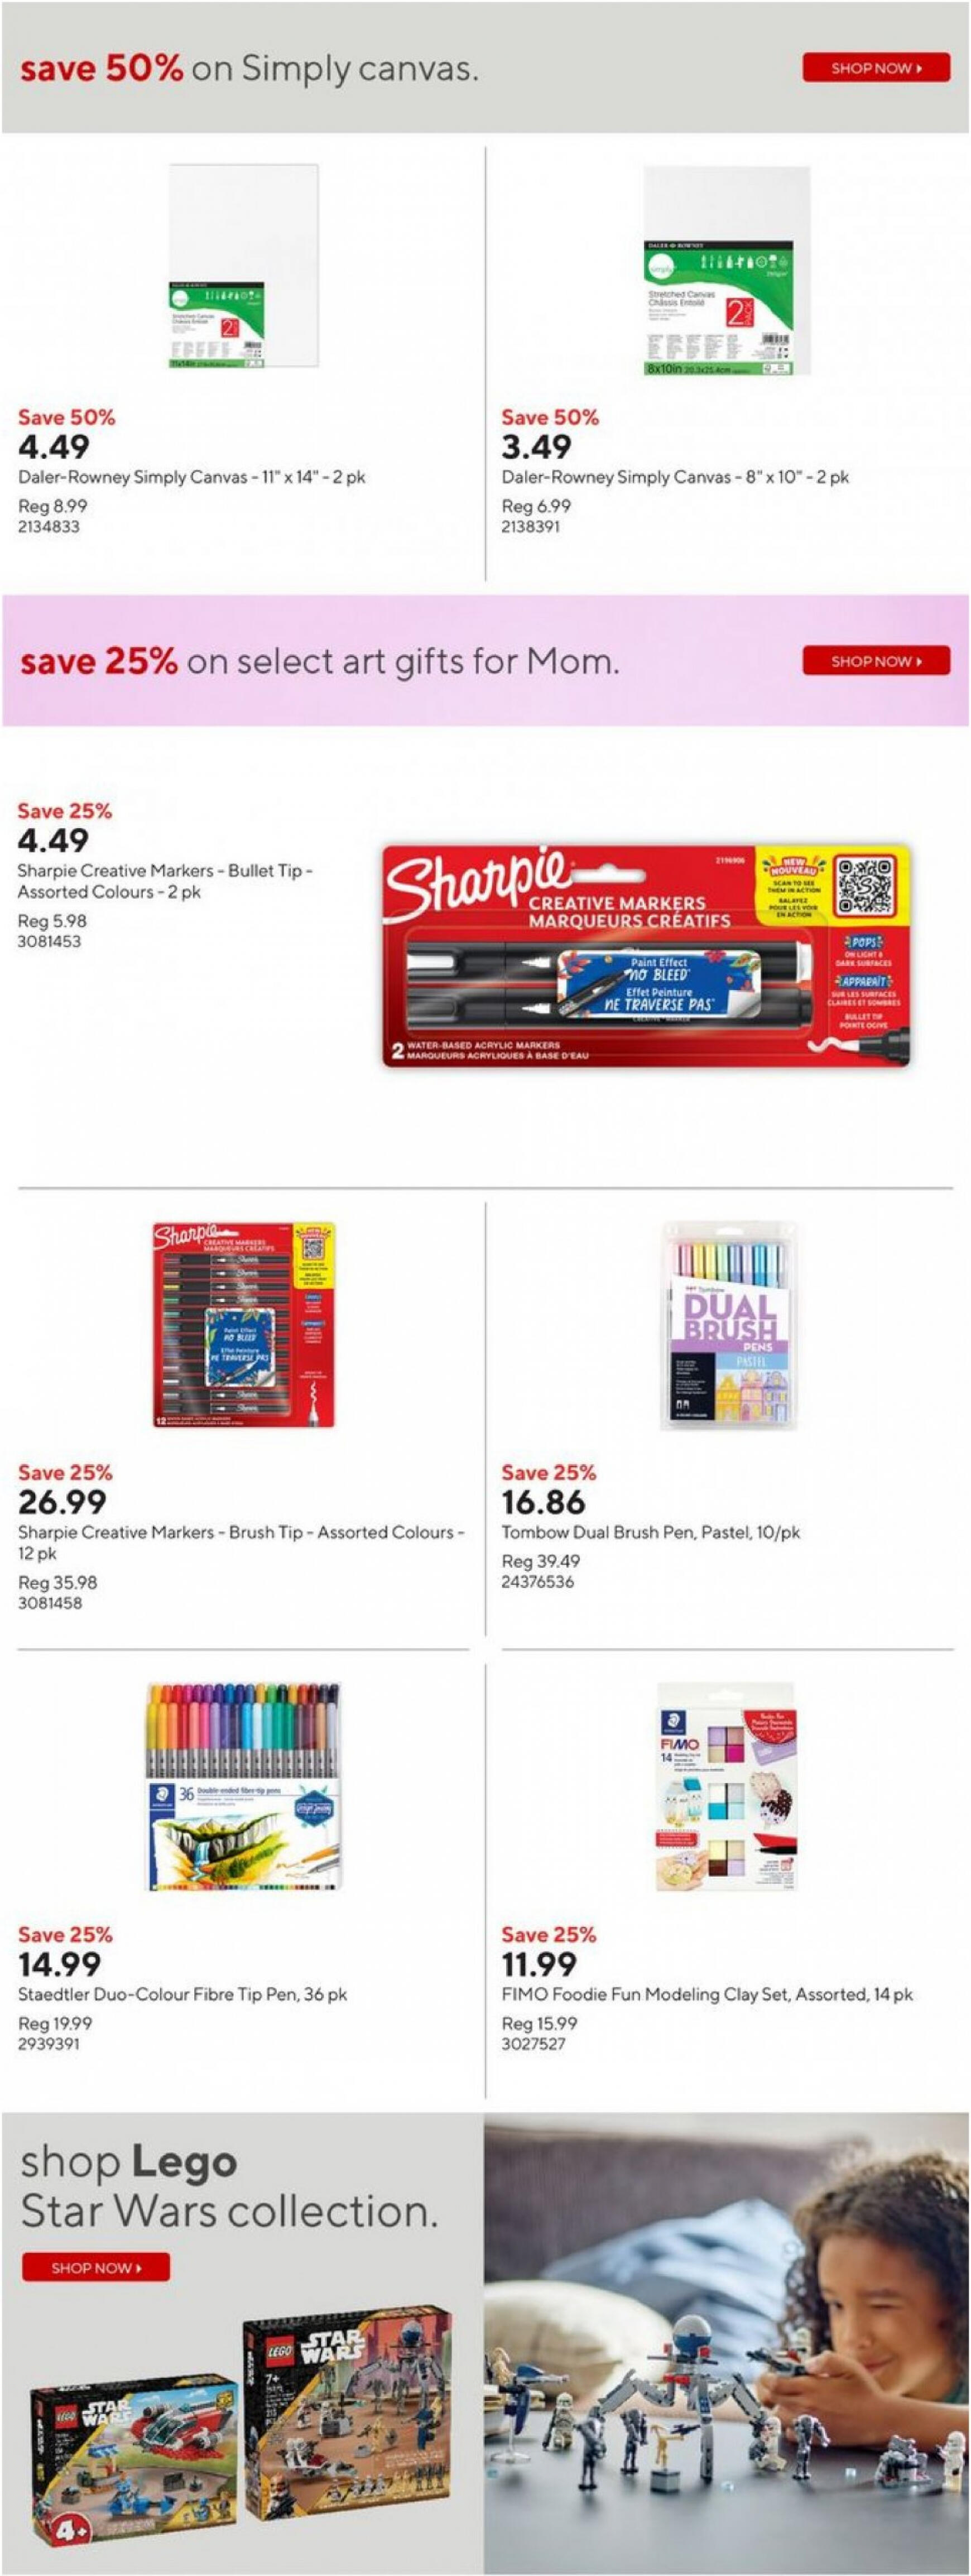 staples - Staples - Weekly flyer current 01.05. - 08.05. - page: 23